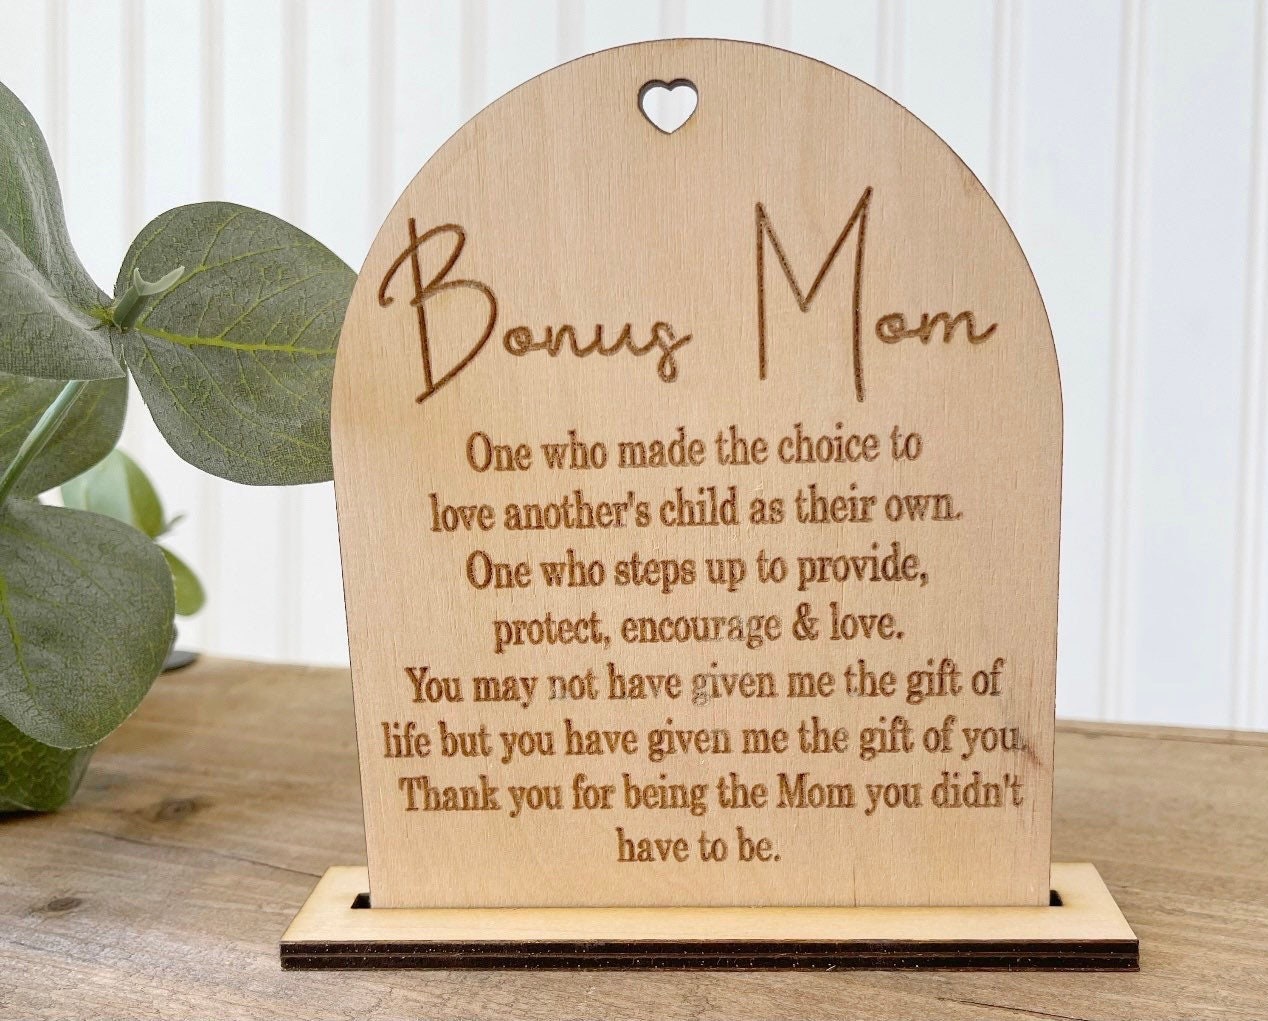 Mother's Day gifts that you probably didn't get but are going to